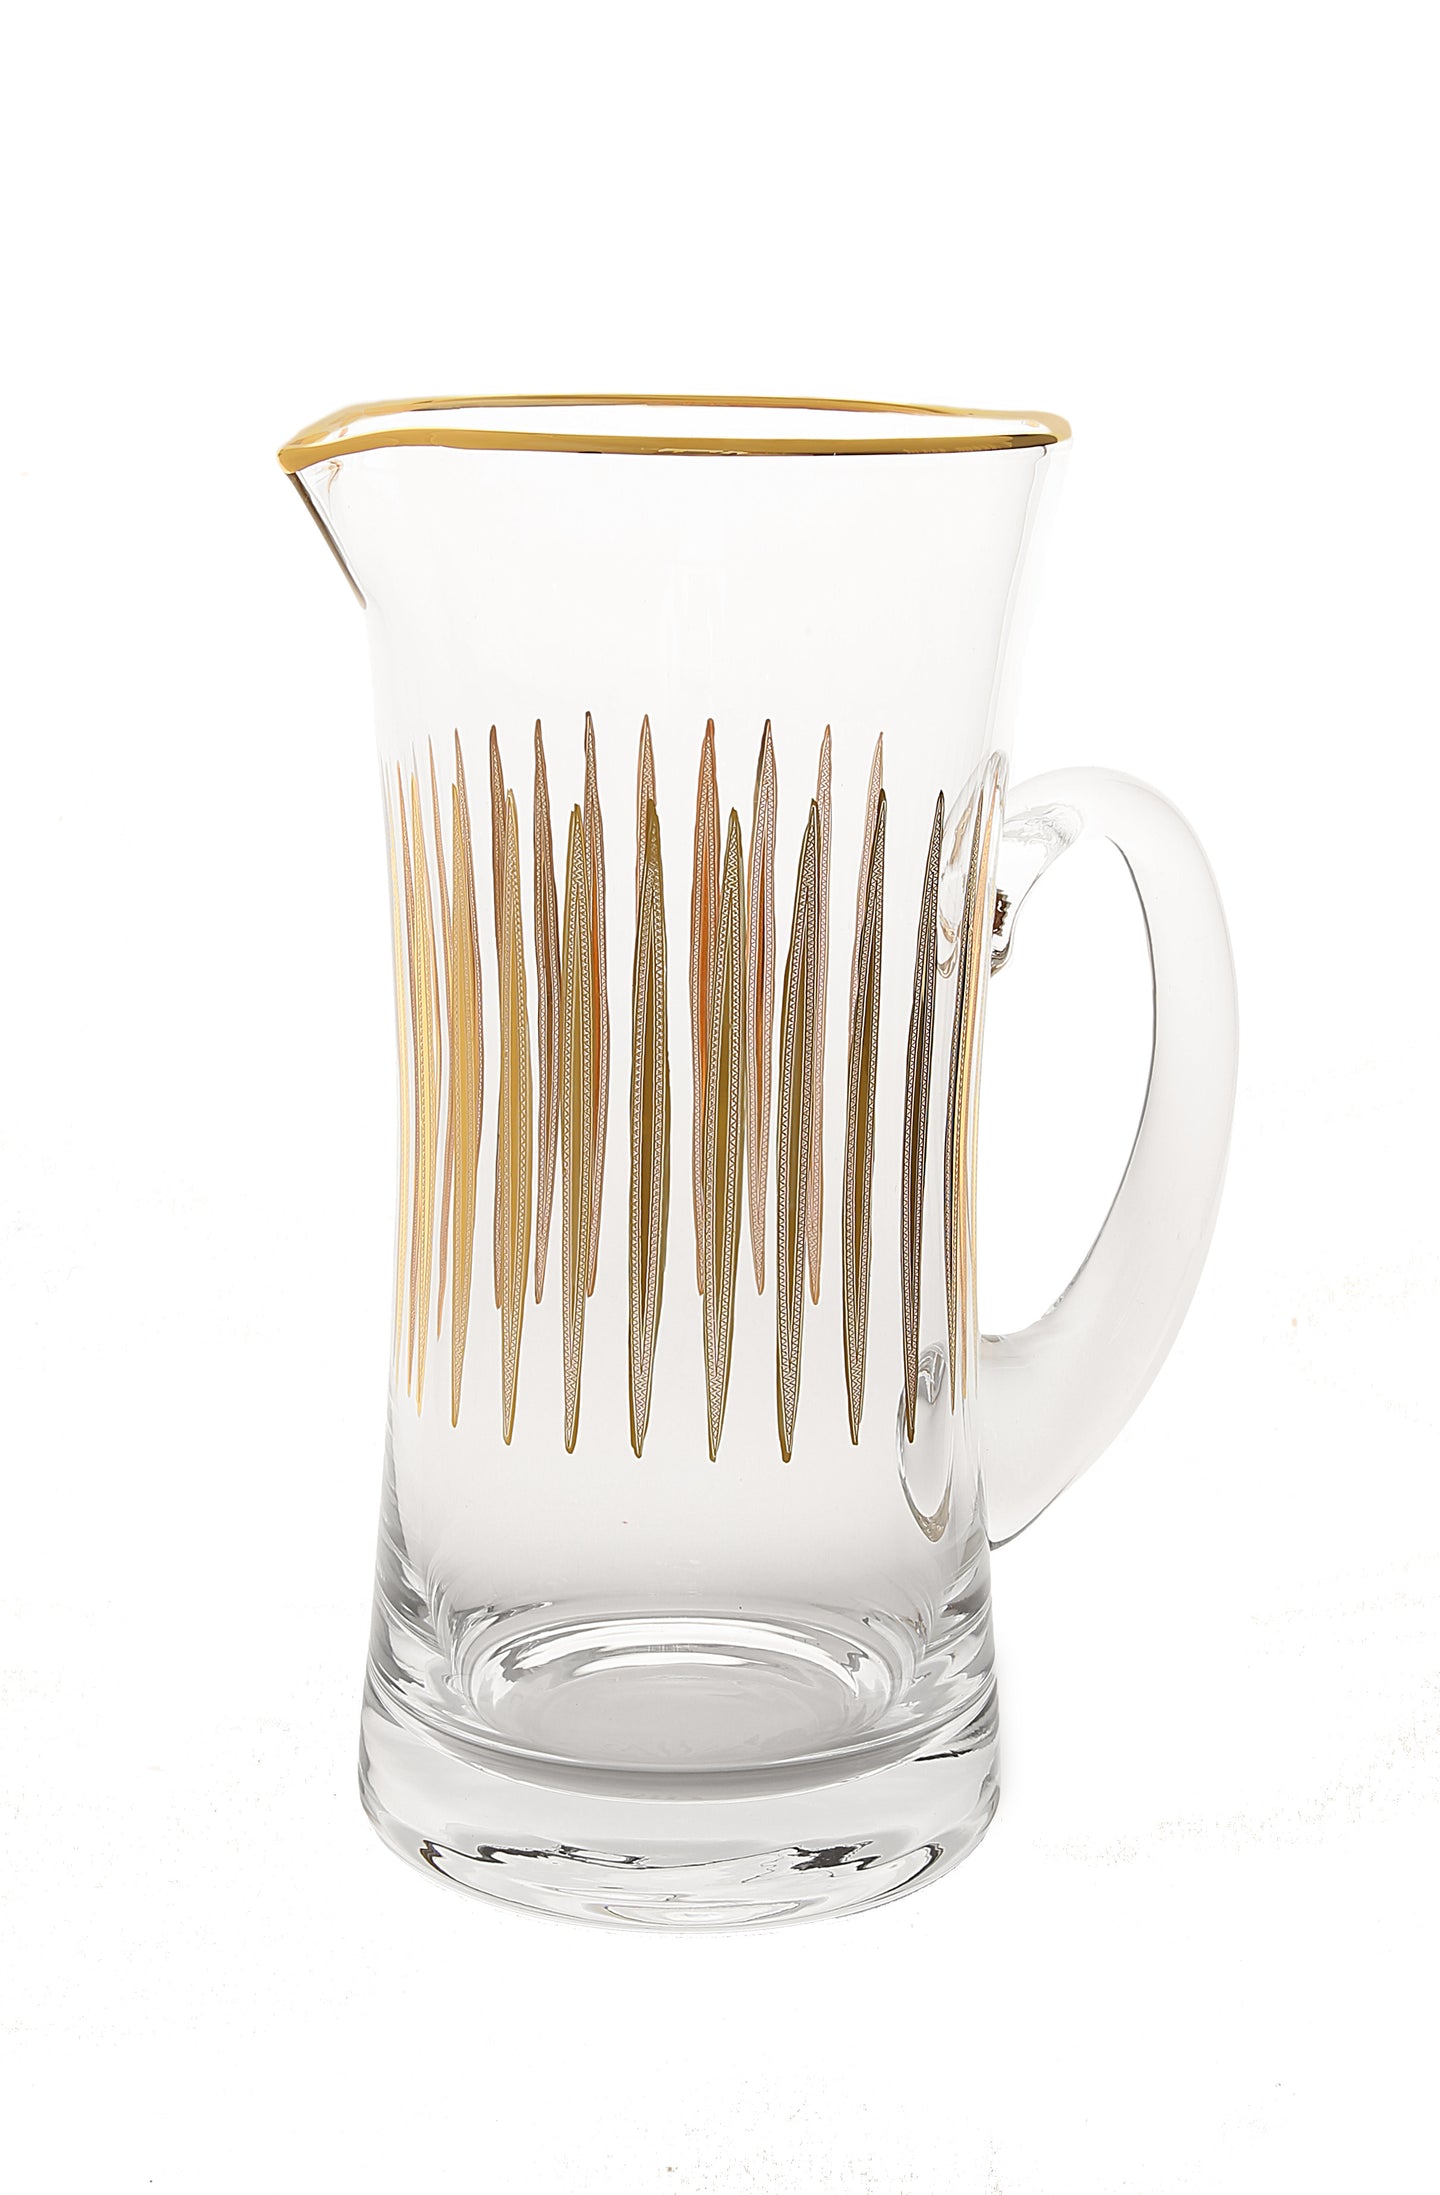 Pitcher with Striped Gold Design